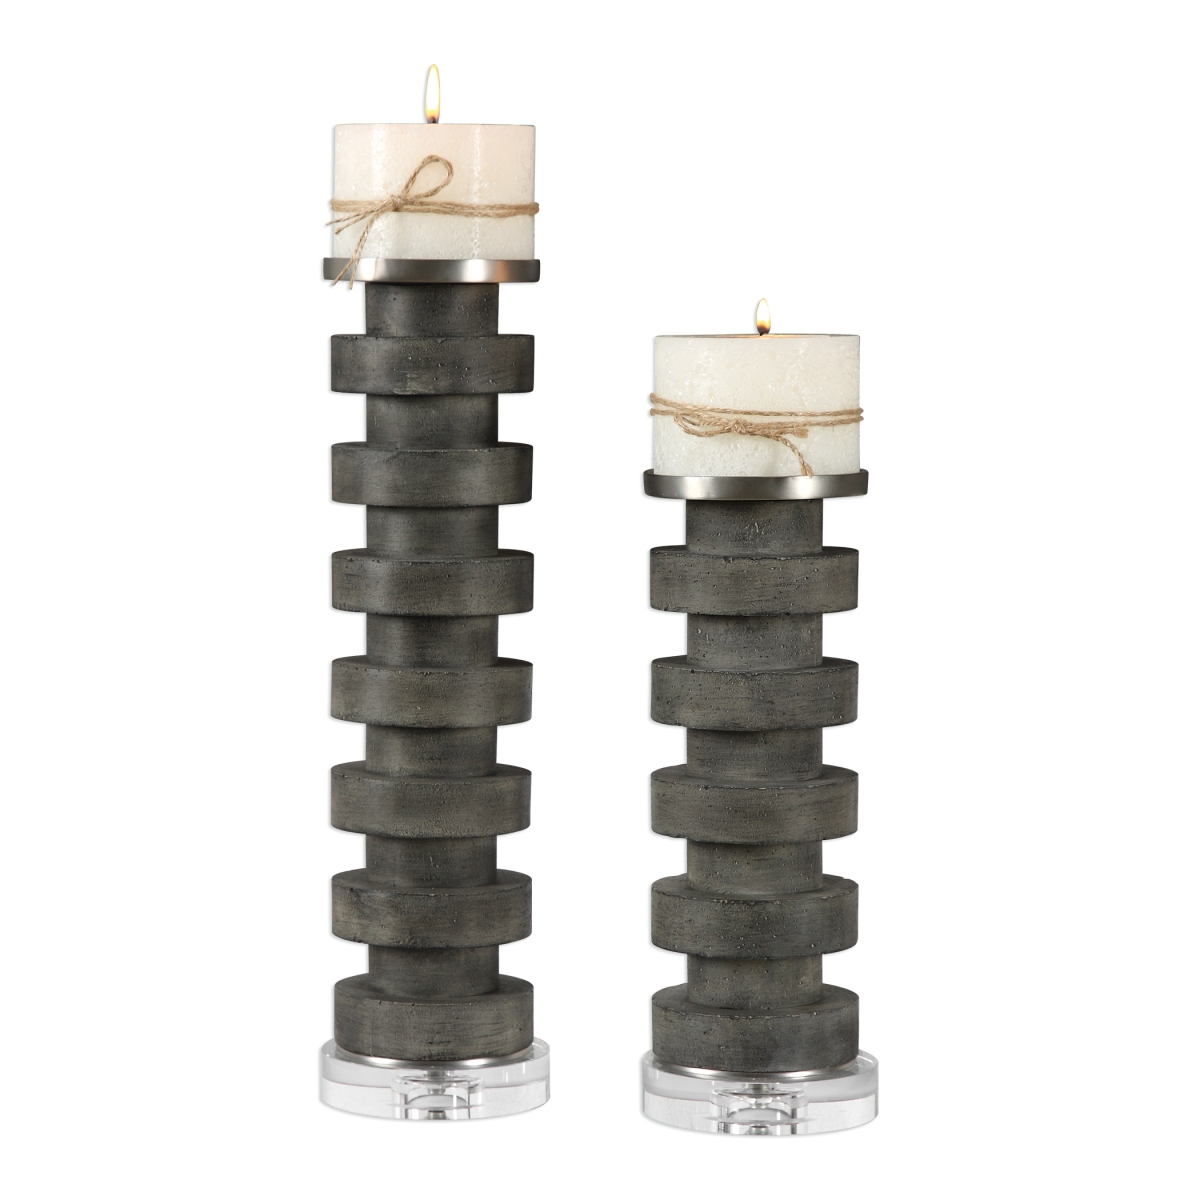 Picture of 212 Main 18818 Karun Concrete Candleholders  Set of 2